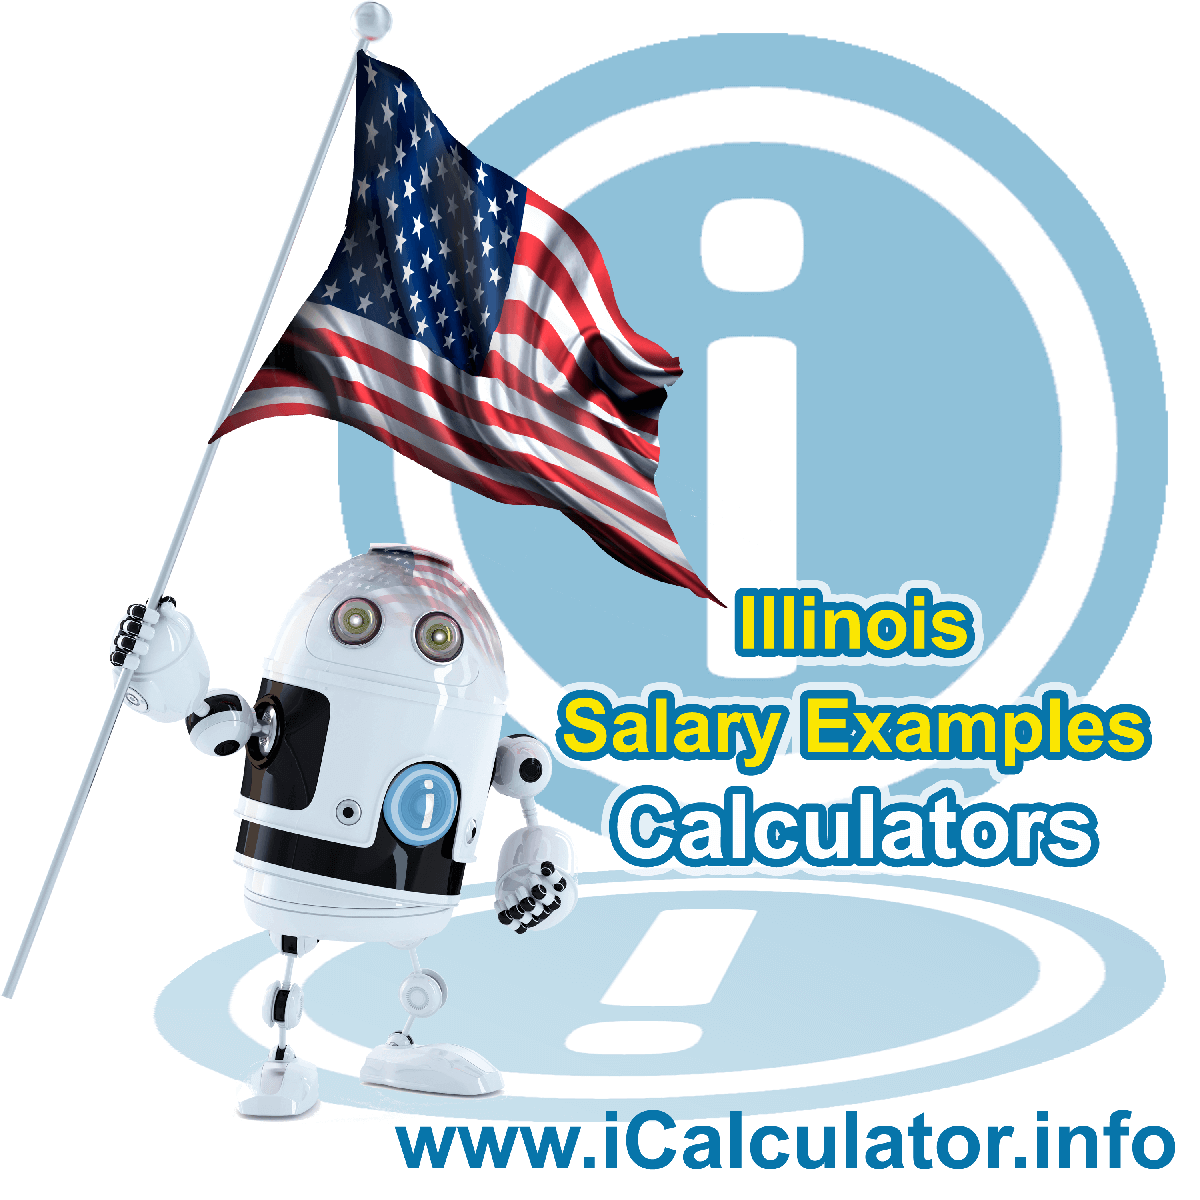 Illinois Salary Example for $ 180,000.00 in 2023 | iCalculator™ | $ 180,000.00 salary example for employee and employer paying Illinois State tincome taxes. Detailed salary after tax calculation including Illinois State Tax, Federal State Tax, Medicare Deductions, Social Security, Capital Gains and other income tax and salary deductions complete with supporting Illinois state tax tables 